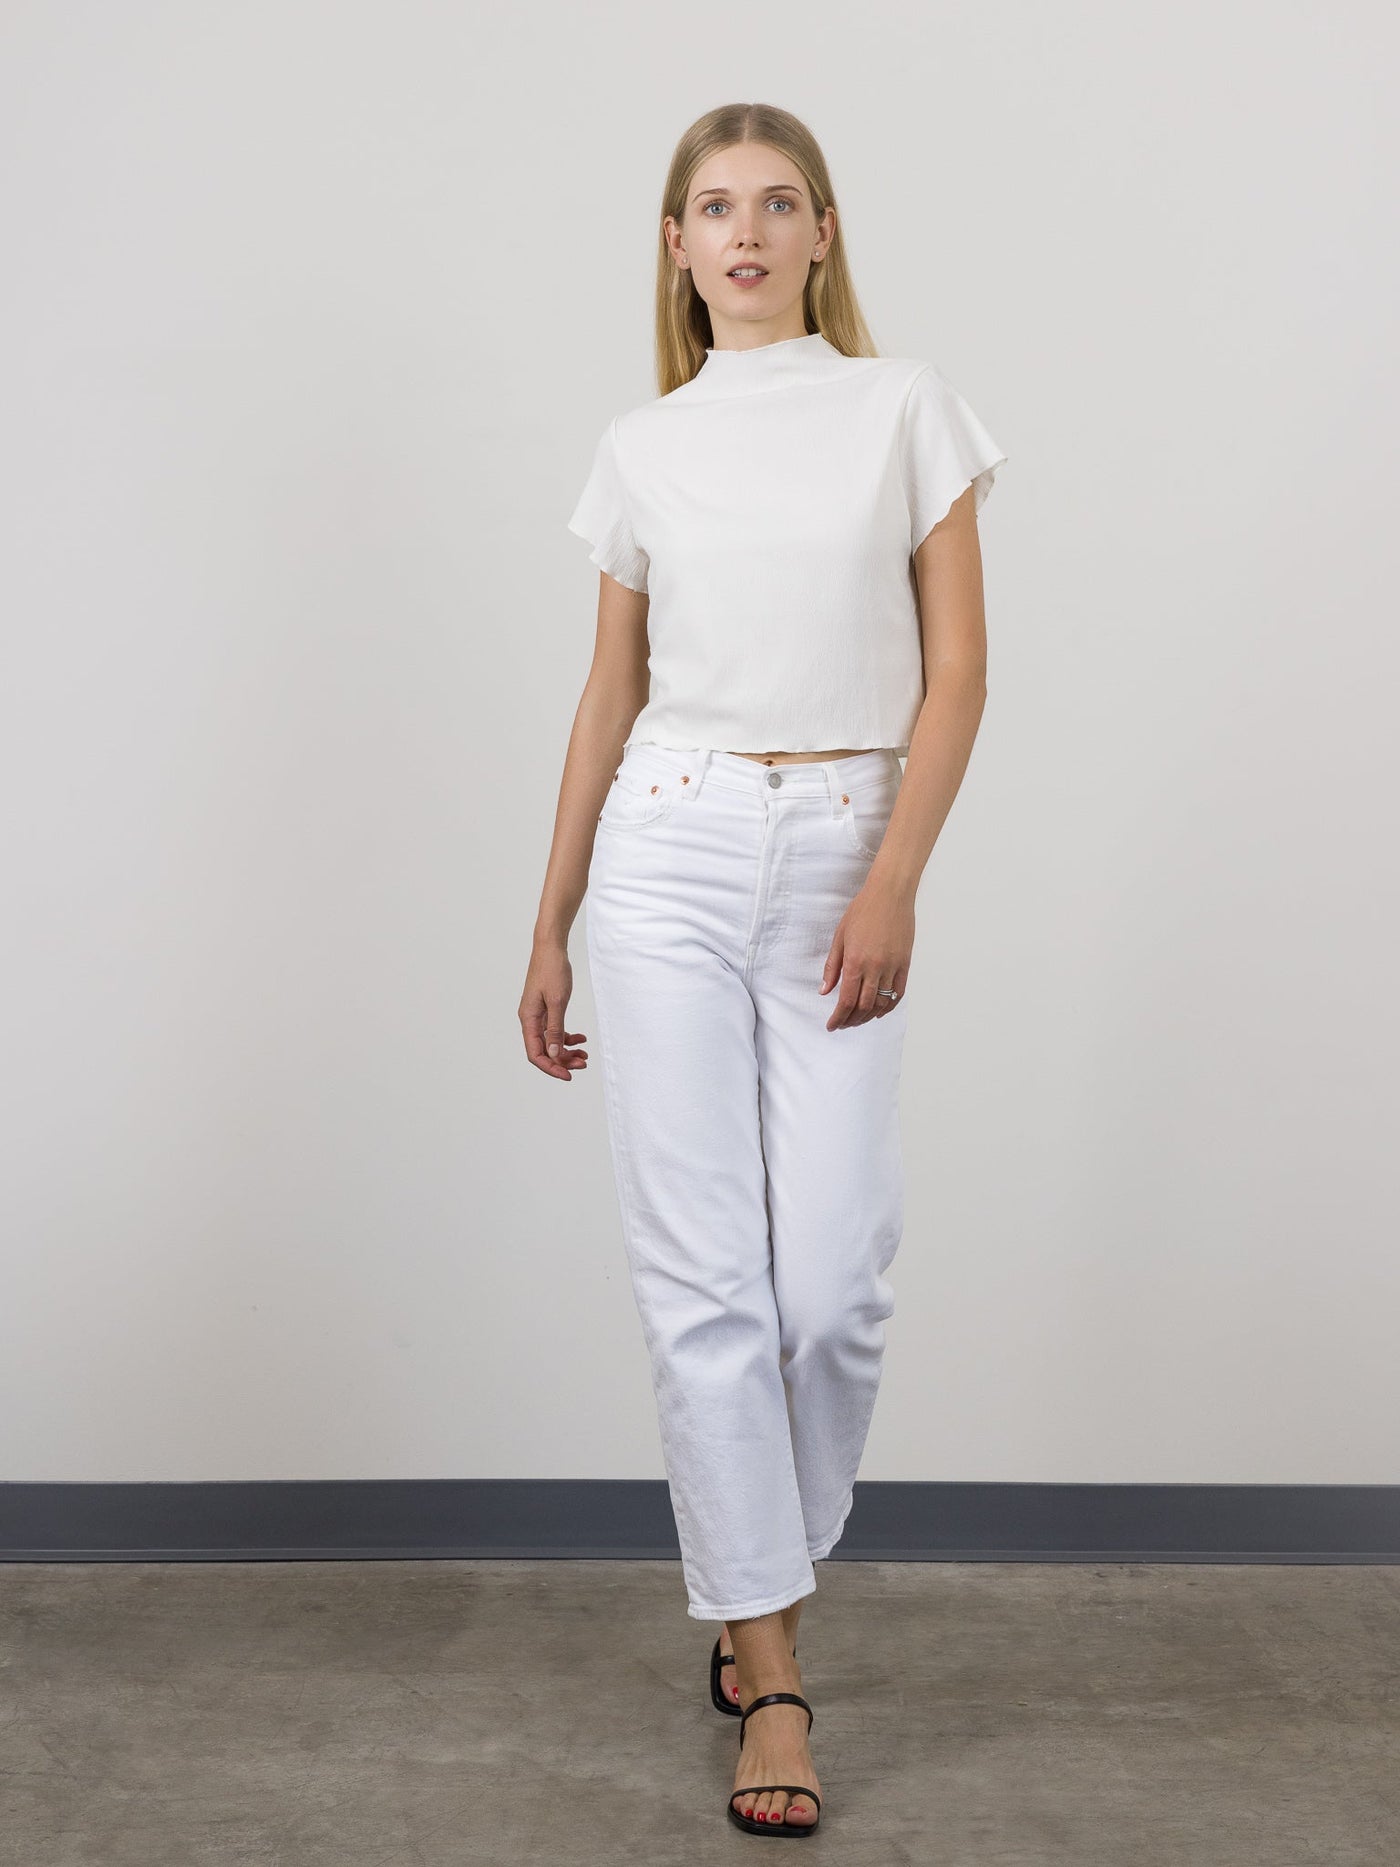 Lucy Mock Neck Top Ivory by Lenviera